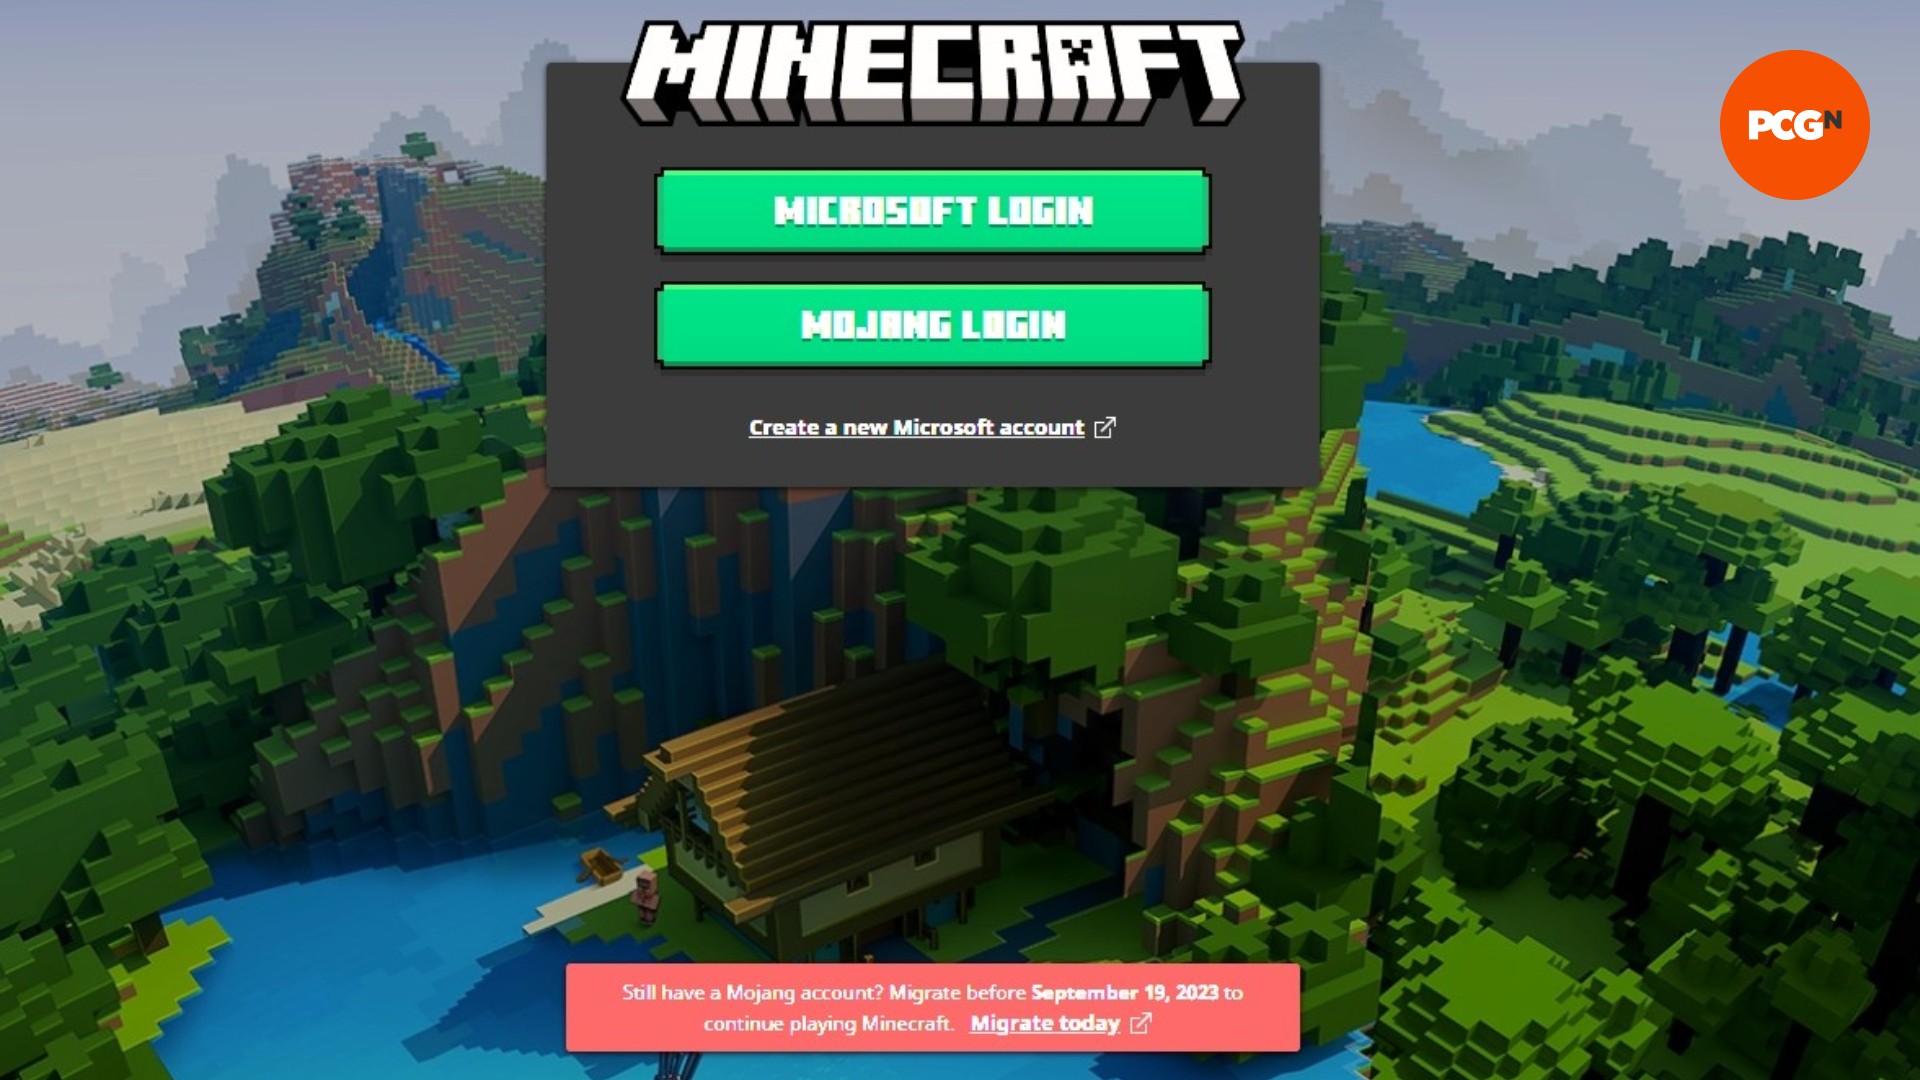 Minecraft account migration not working or failing? Here's the